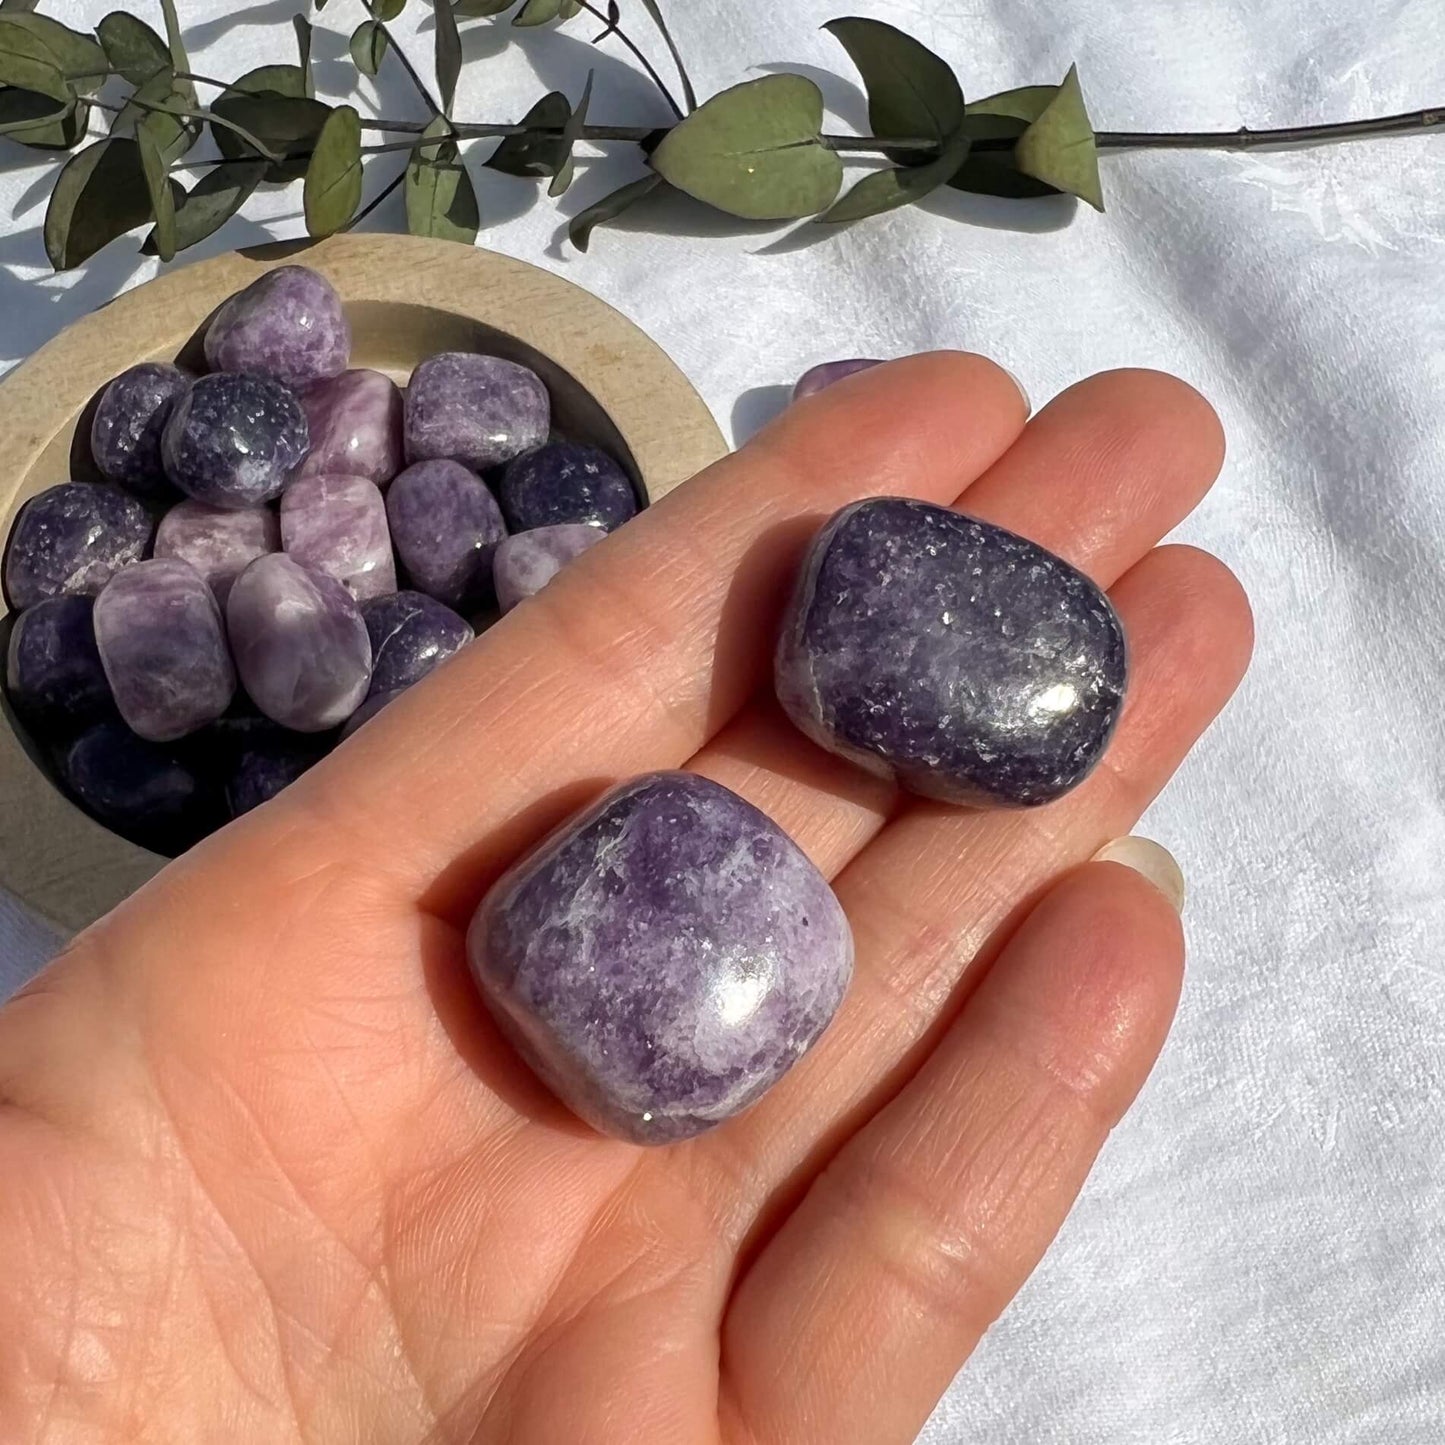 Dark and pale purple and white patterned lepidolite crystal tumblestones in an outstretched hand